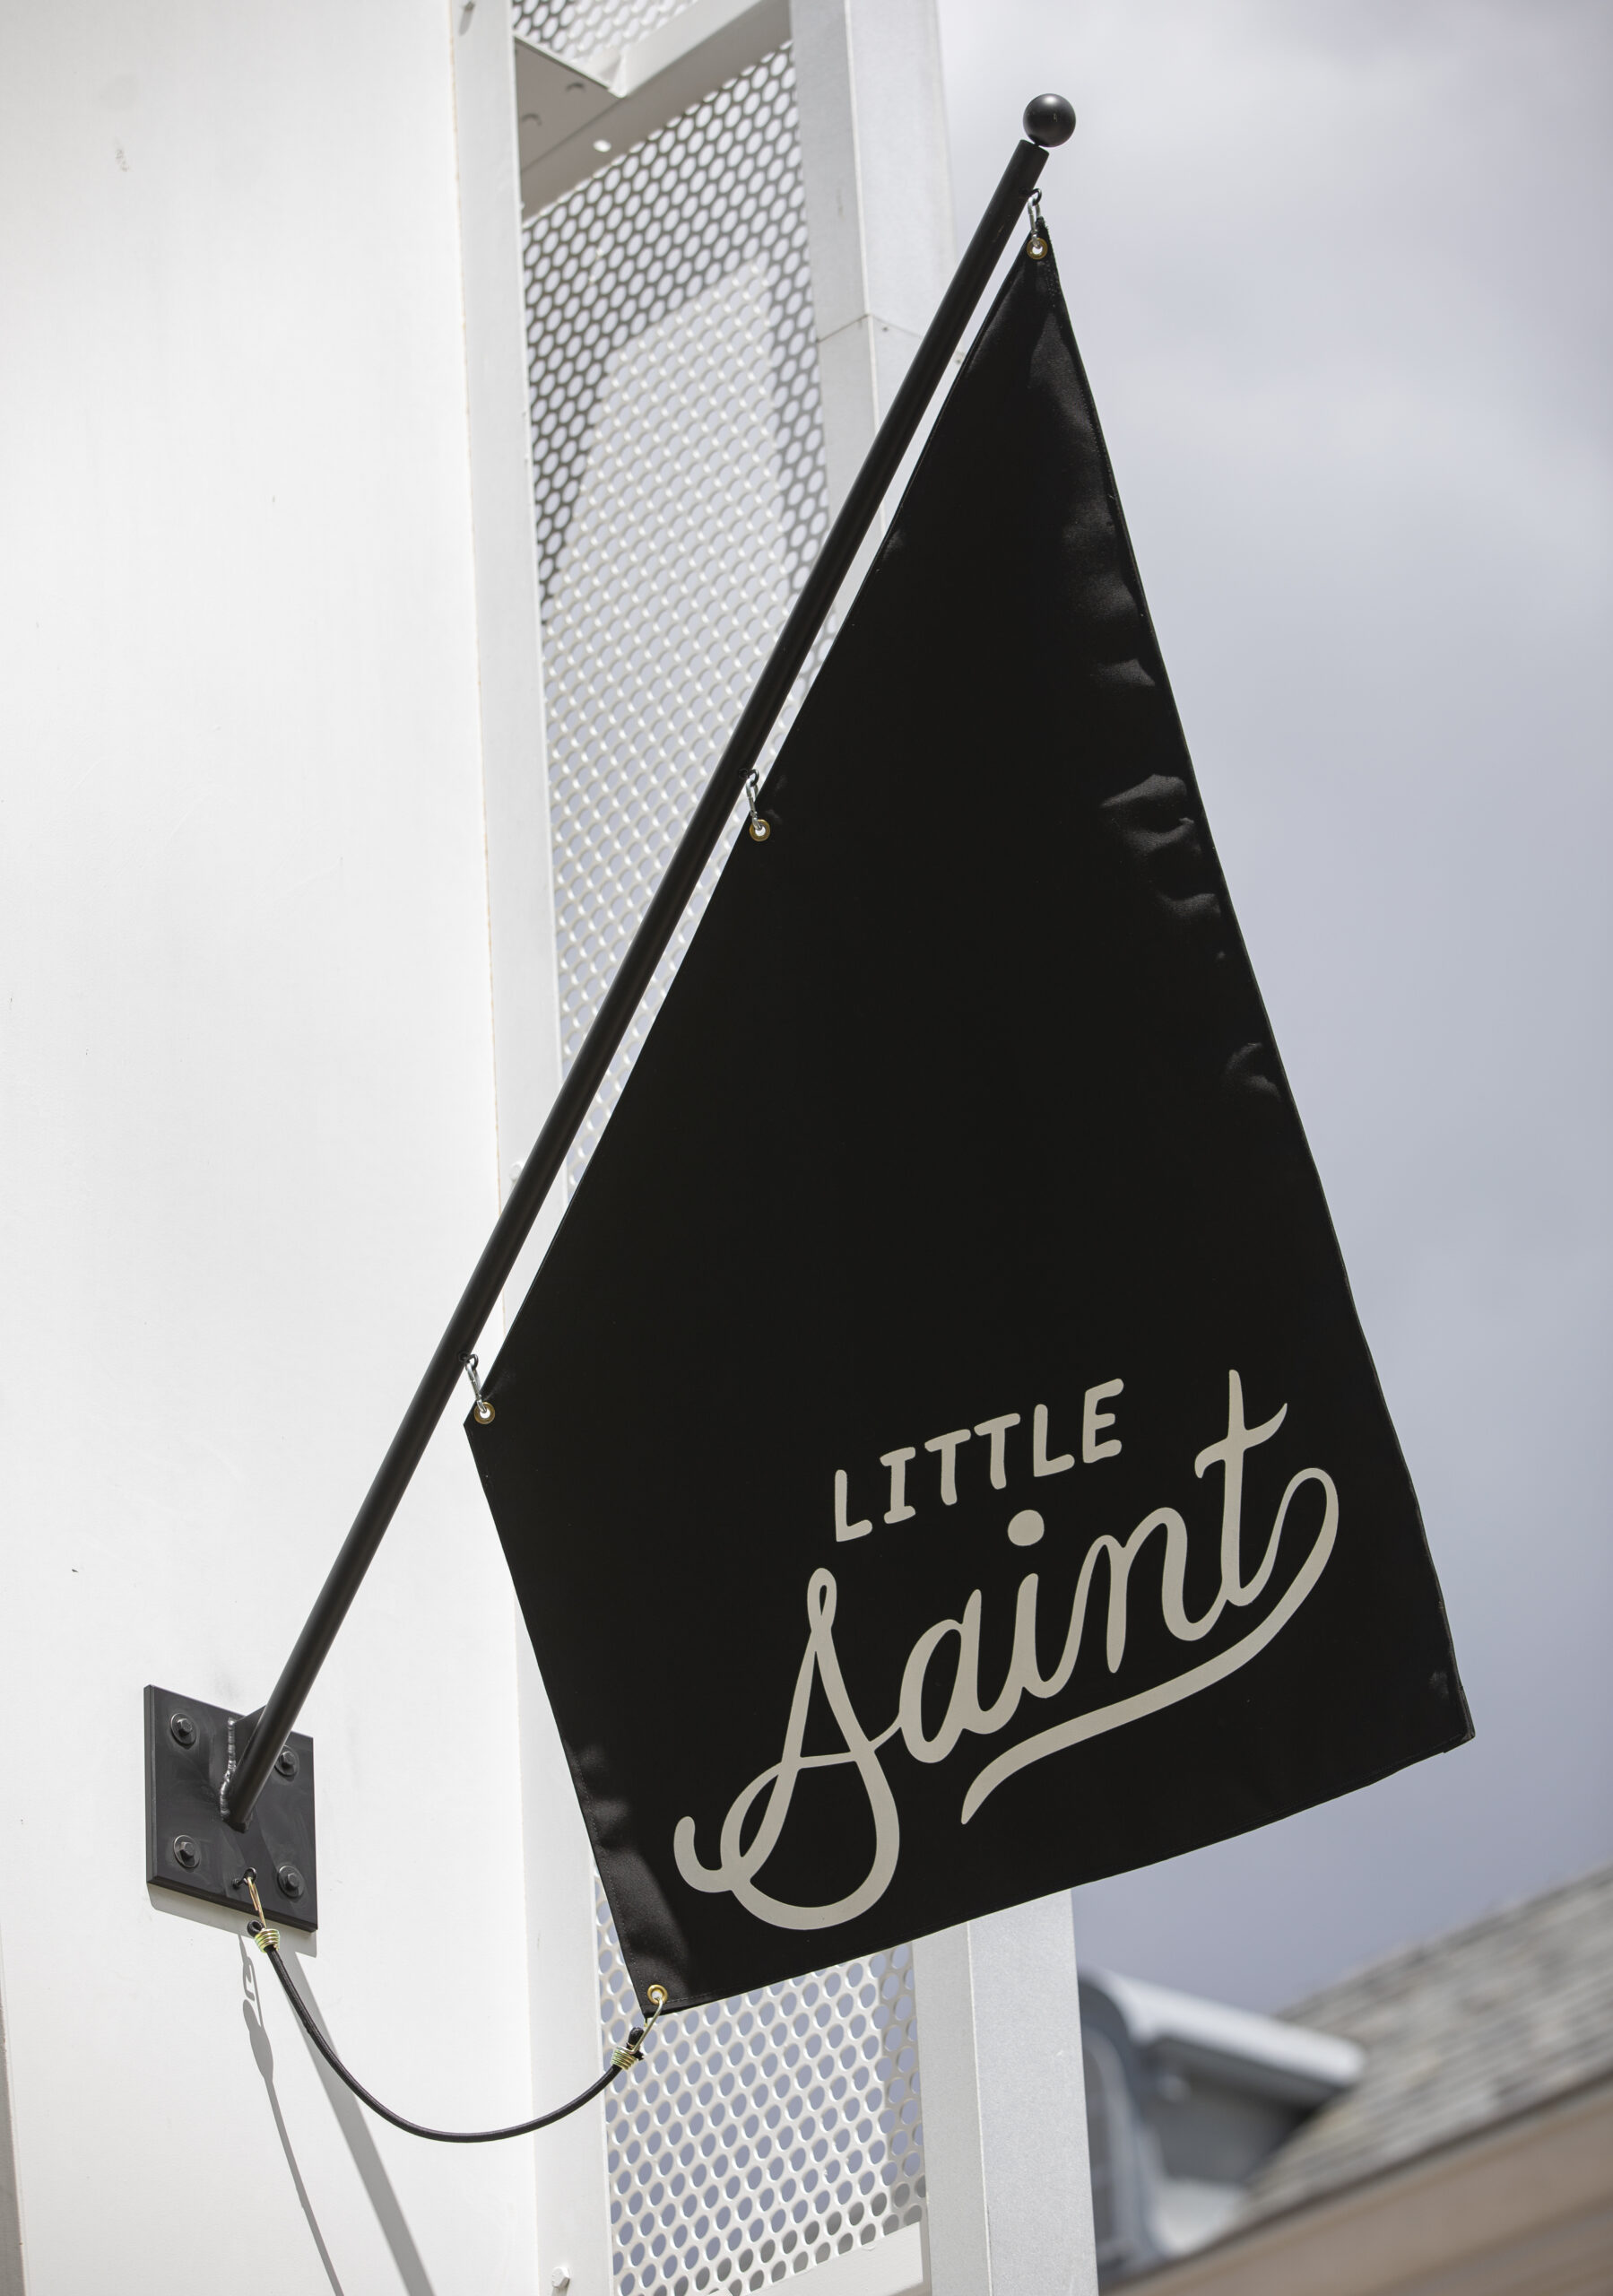 A flag graces the exterior of Little Saint during FridayÕs grand opening in downtown Healdsburg on April 22, 2022. (Chad Surmick / The Press Democrat)